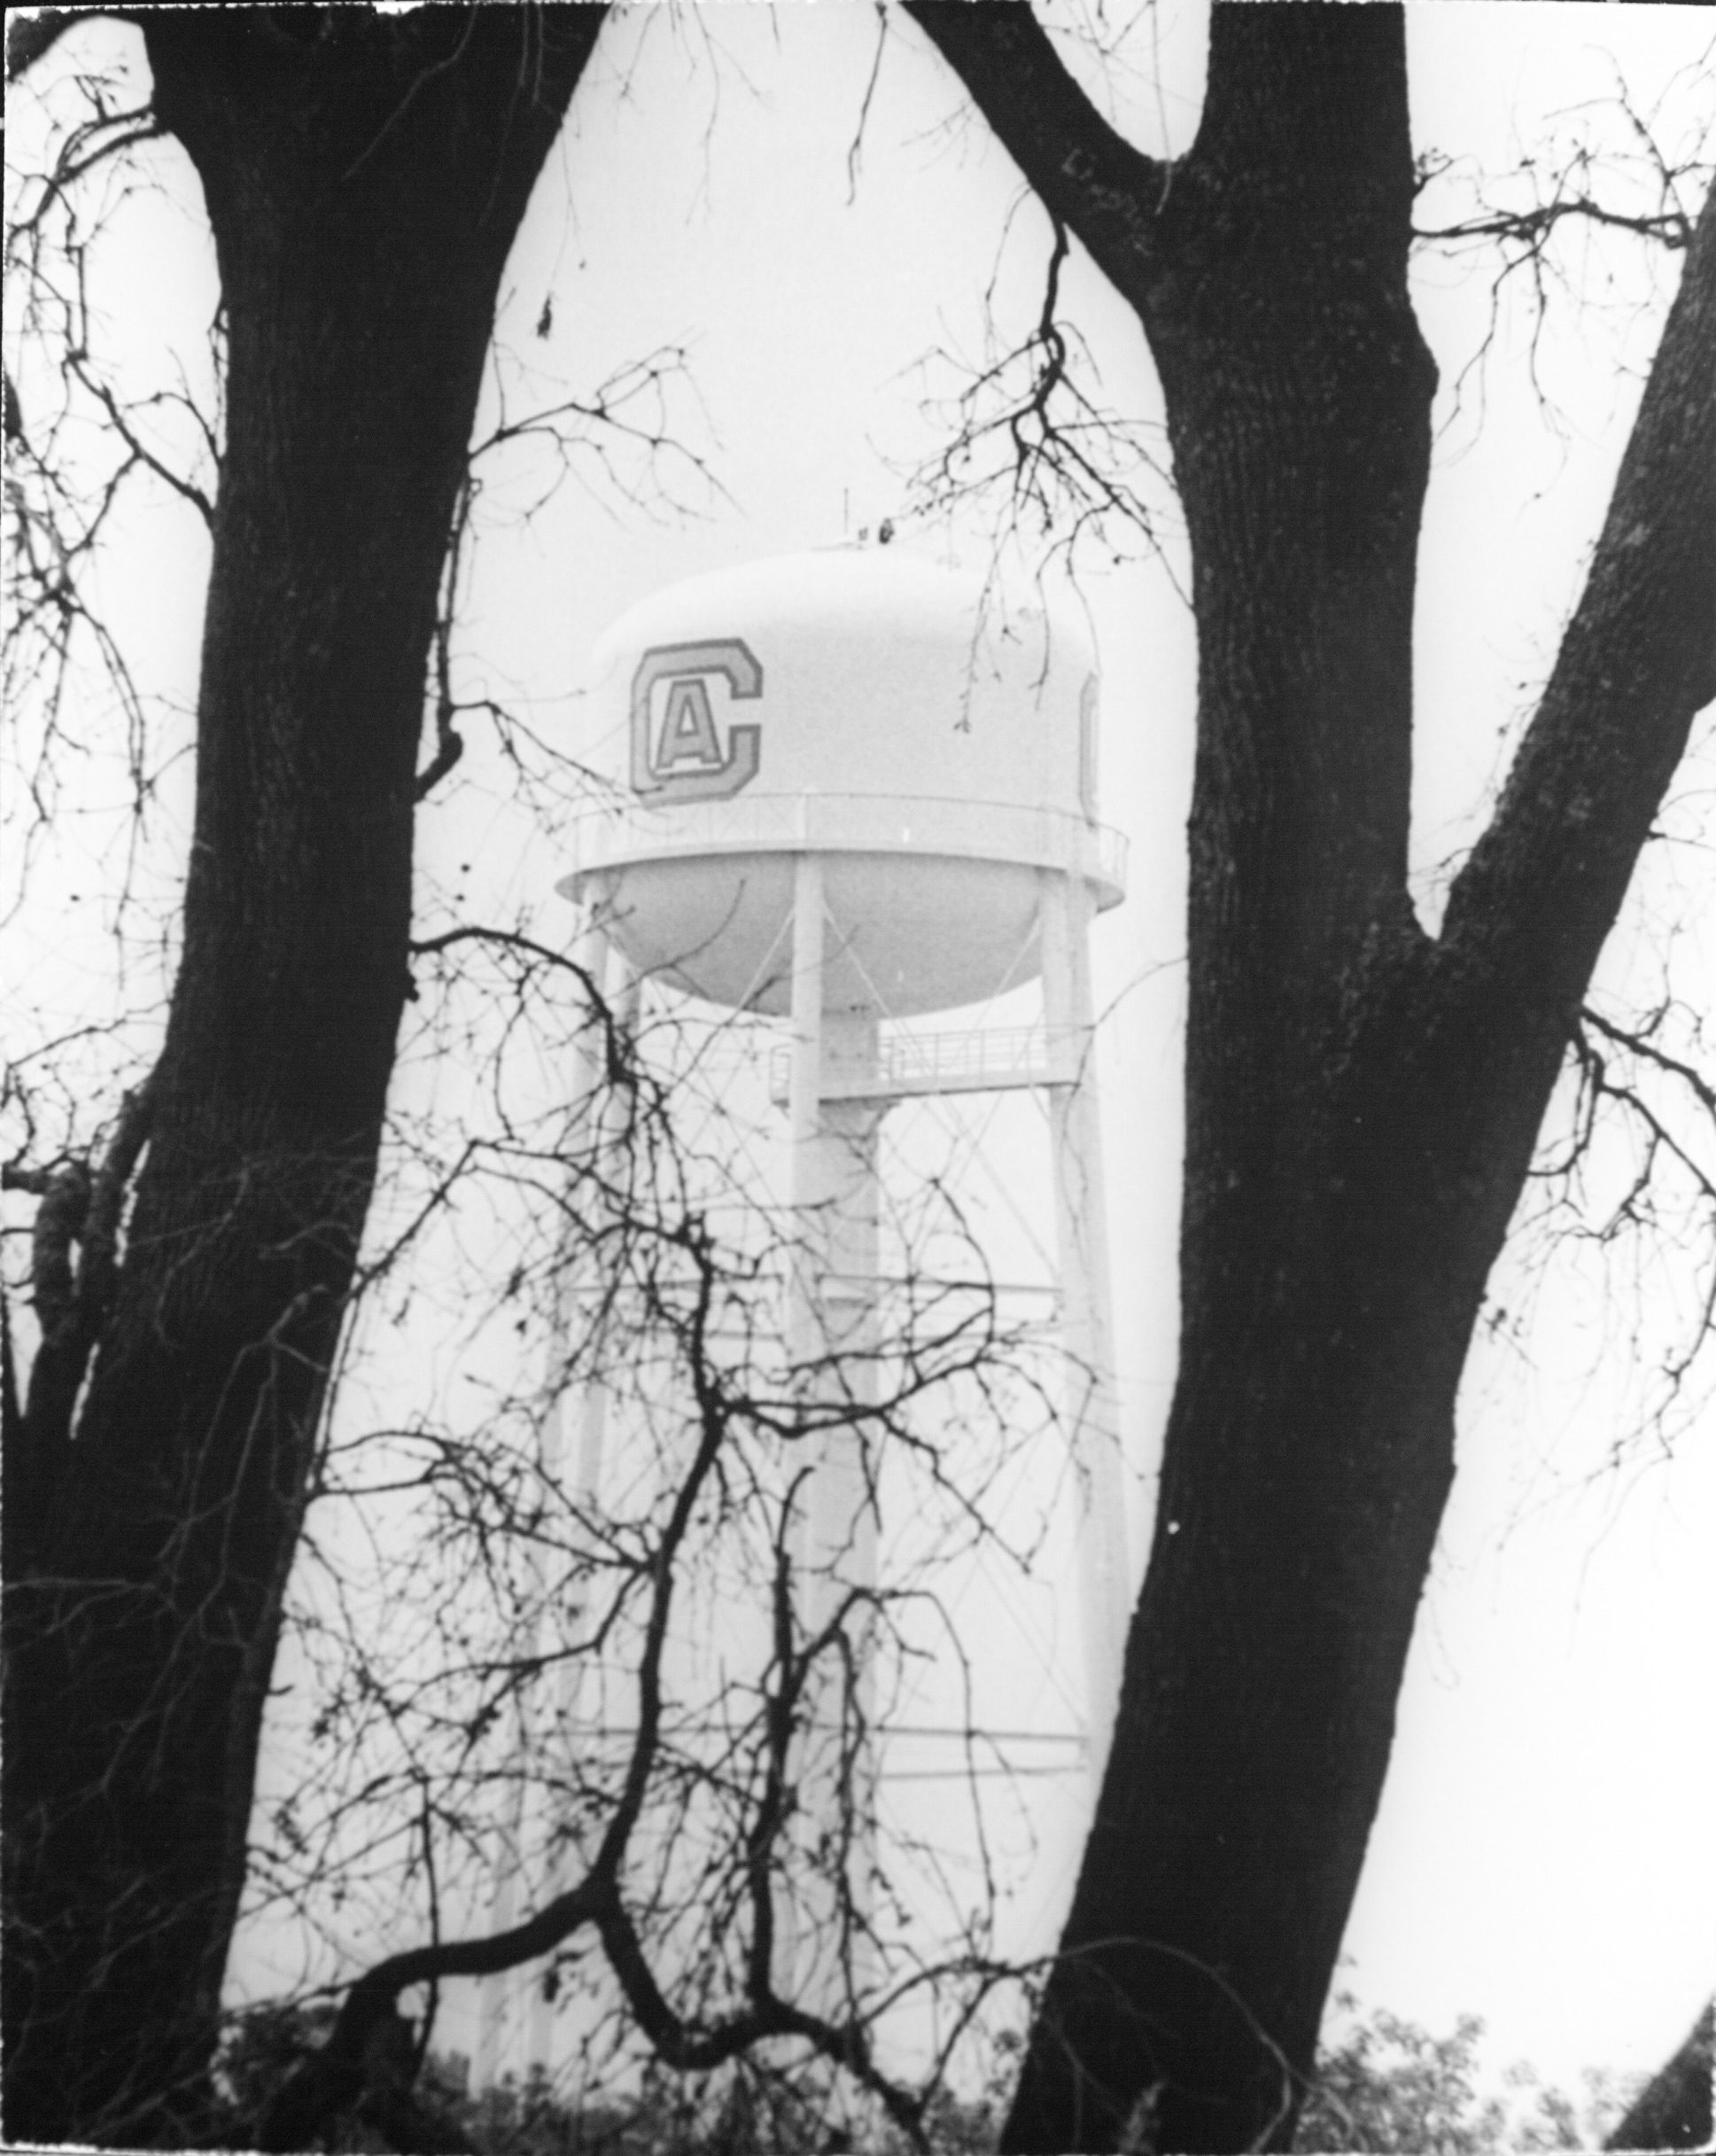 Photograph of water tower with CA painted on it viewed through trees